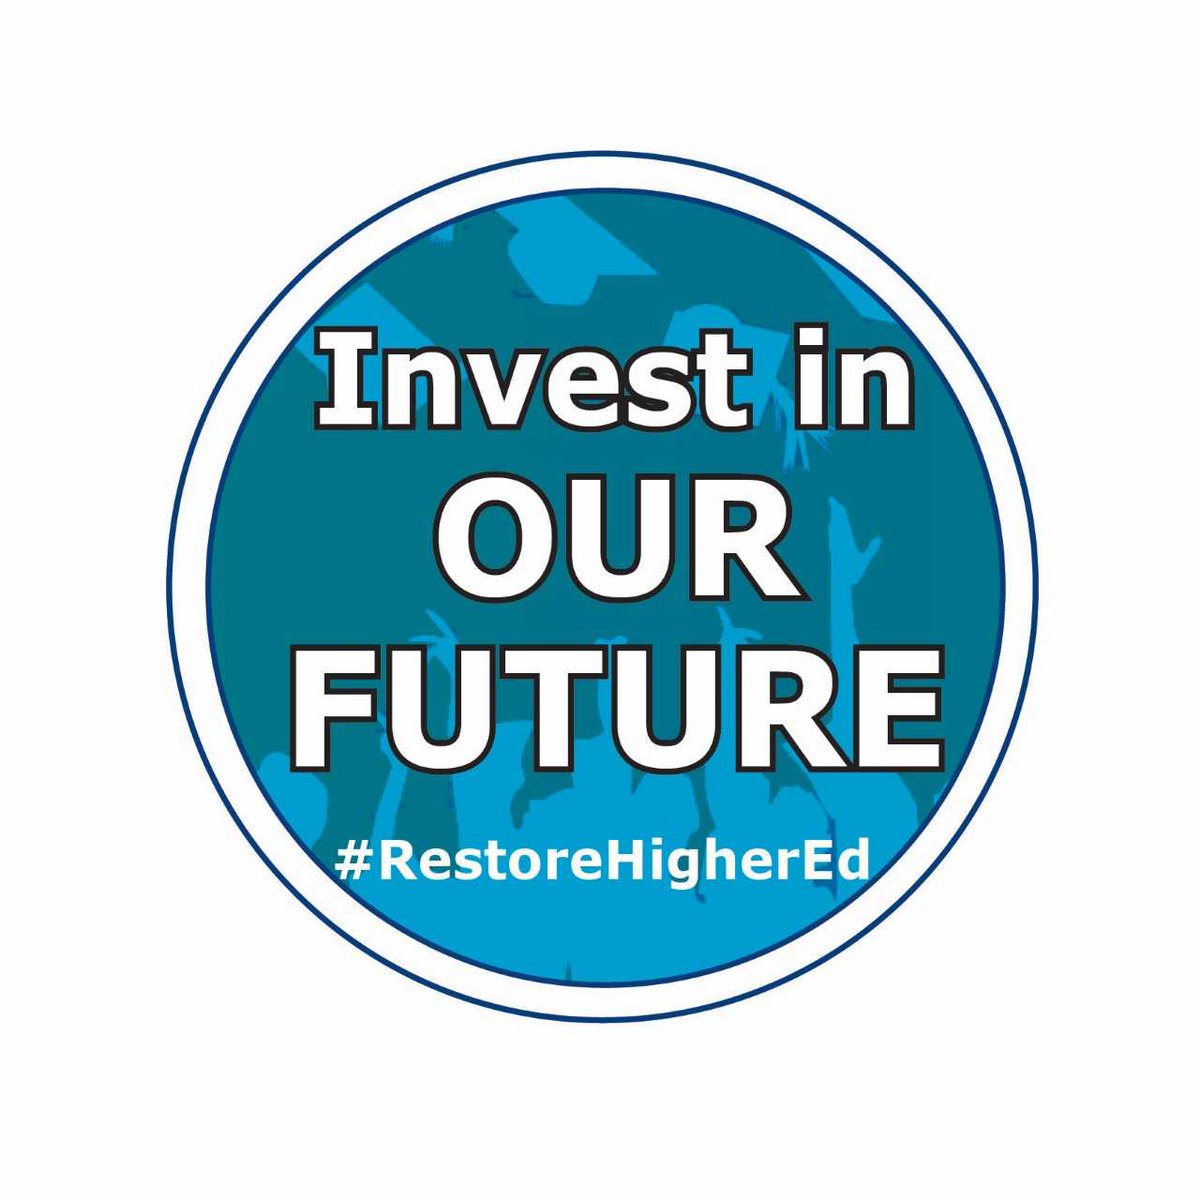 It’s Higher Ed Day at the Capitol – let’s recognize the value of investing in public colleges & universities. More degrees = stronger workforce, stronger economy. #RestoreHigherEd